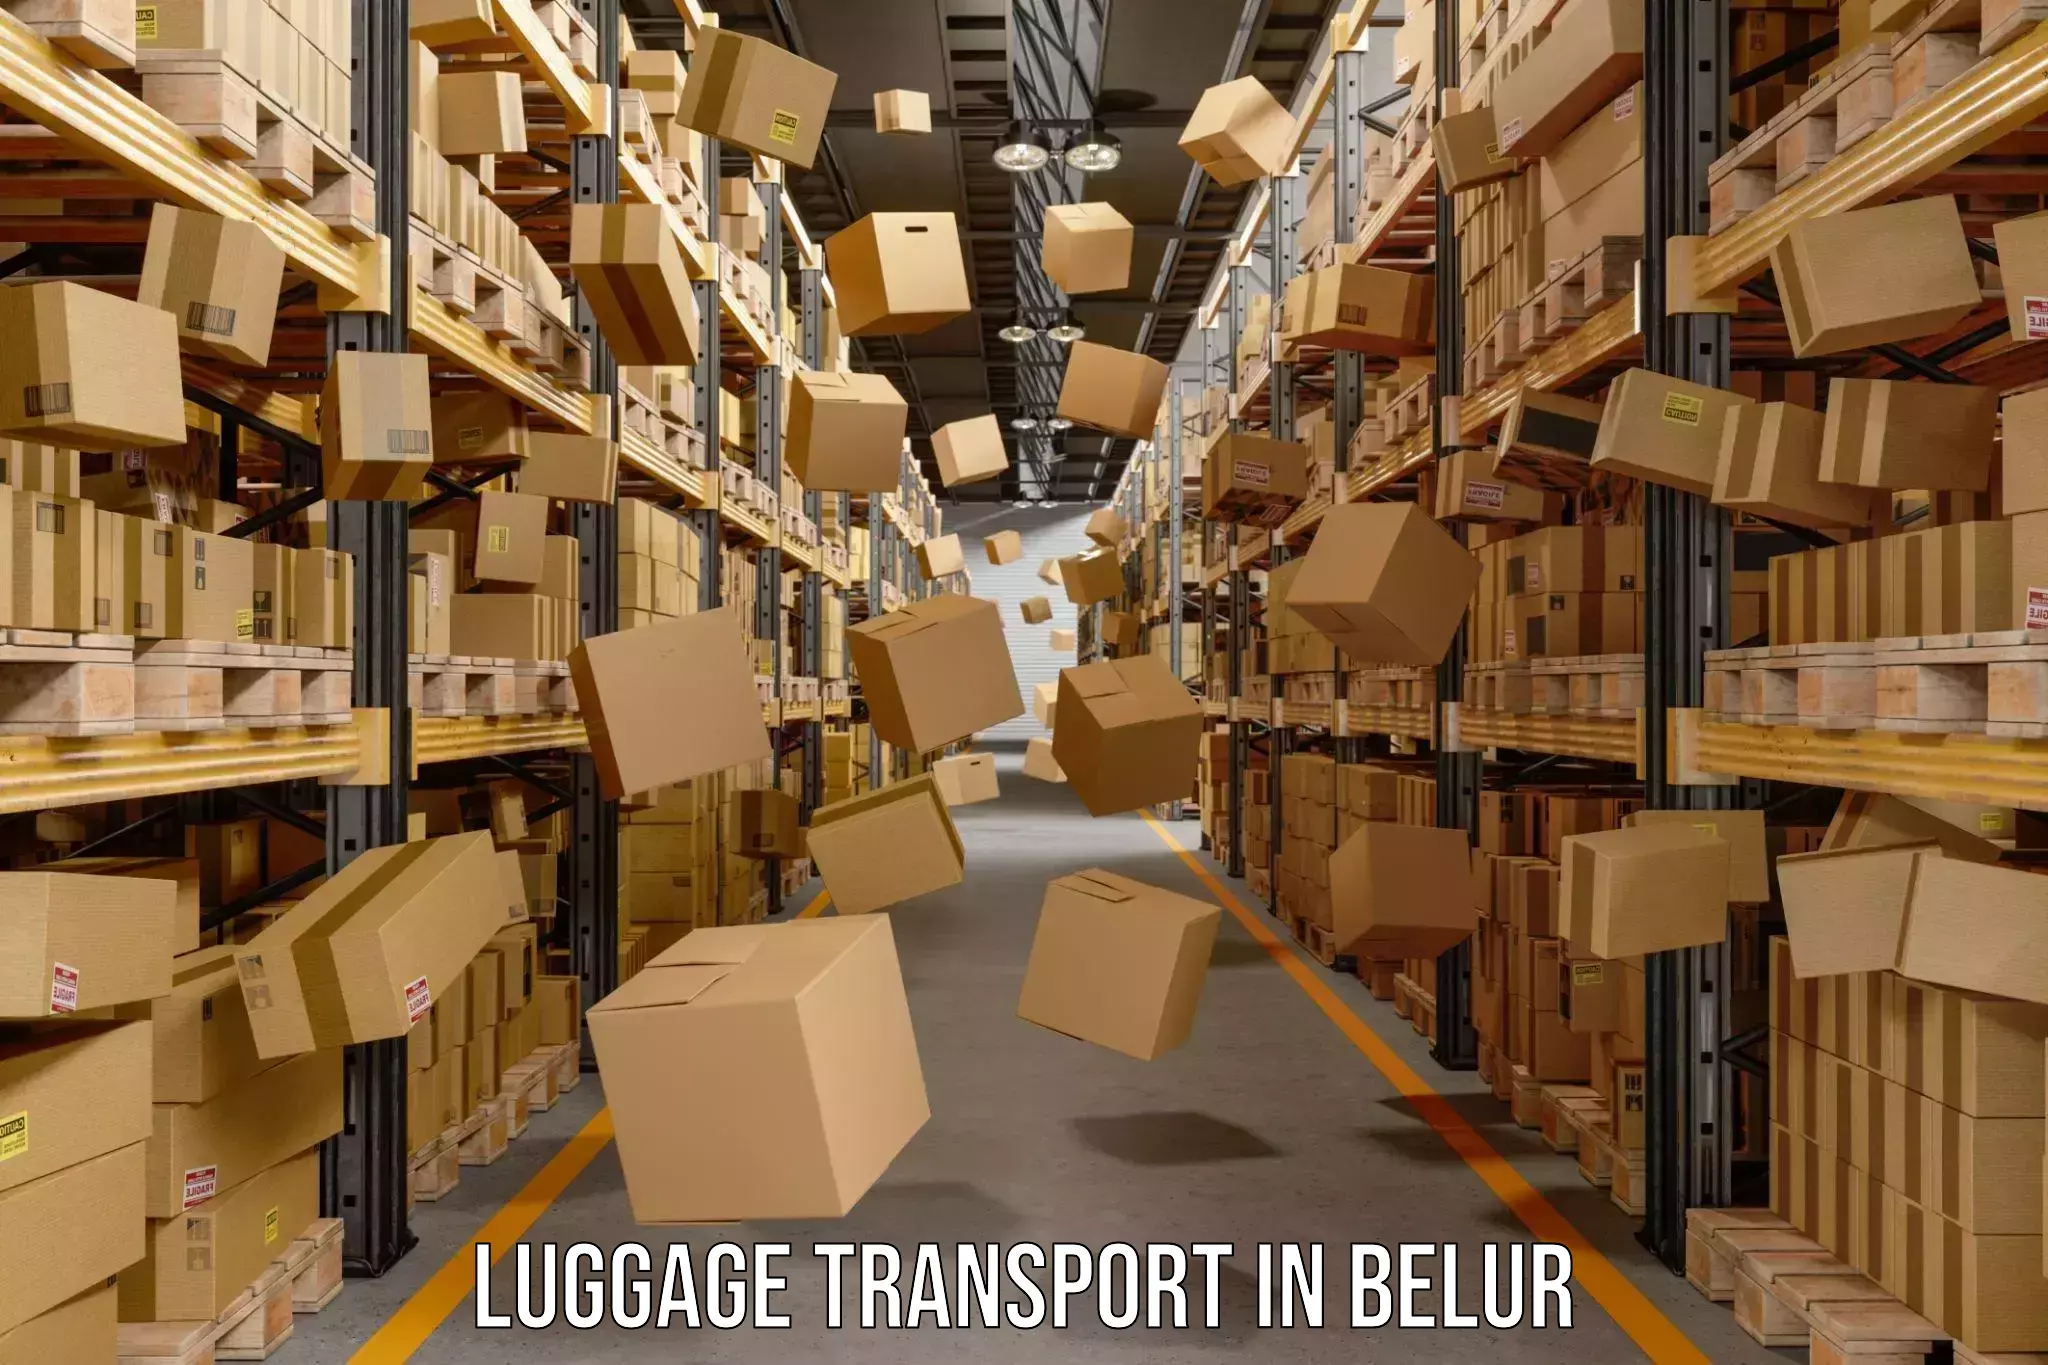 Automated luggage transport in Belur